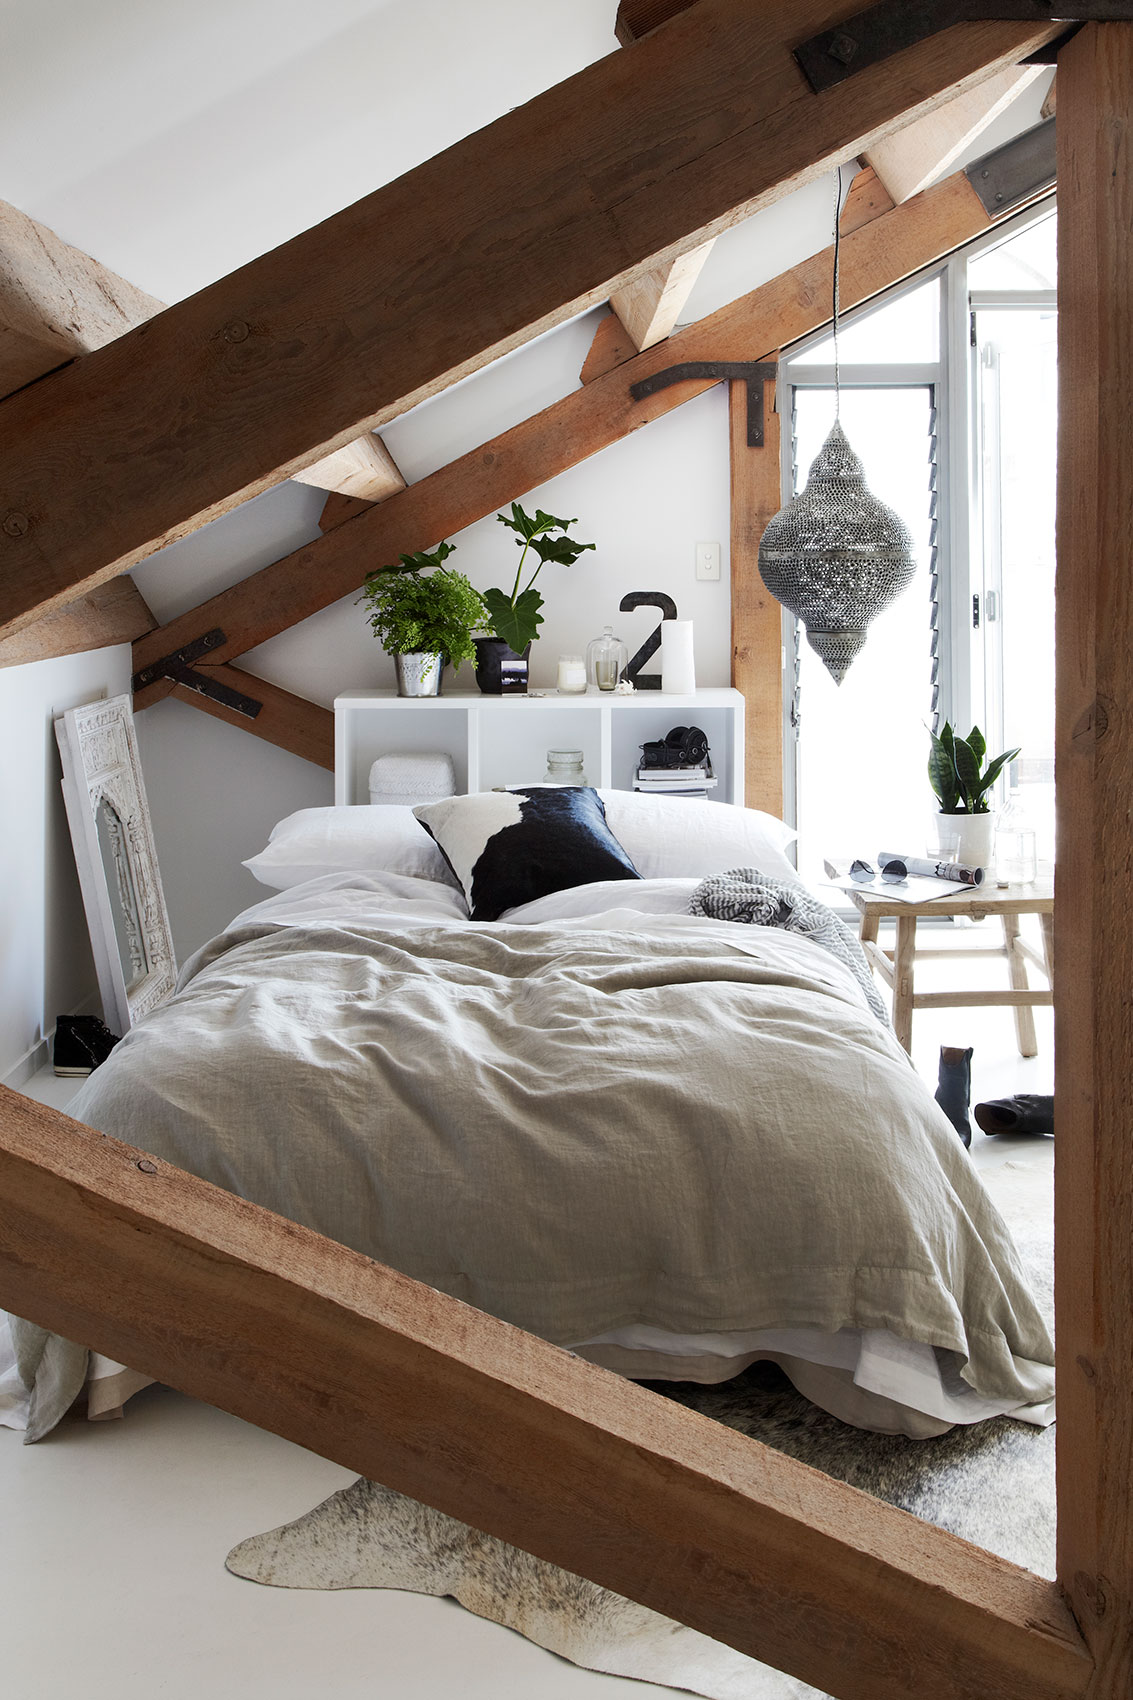 Light Wood Loft Style Pitched Roof Bedroom • Architecture & Interior Photography